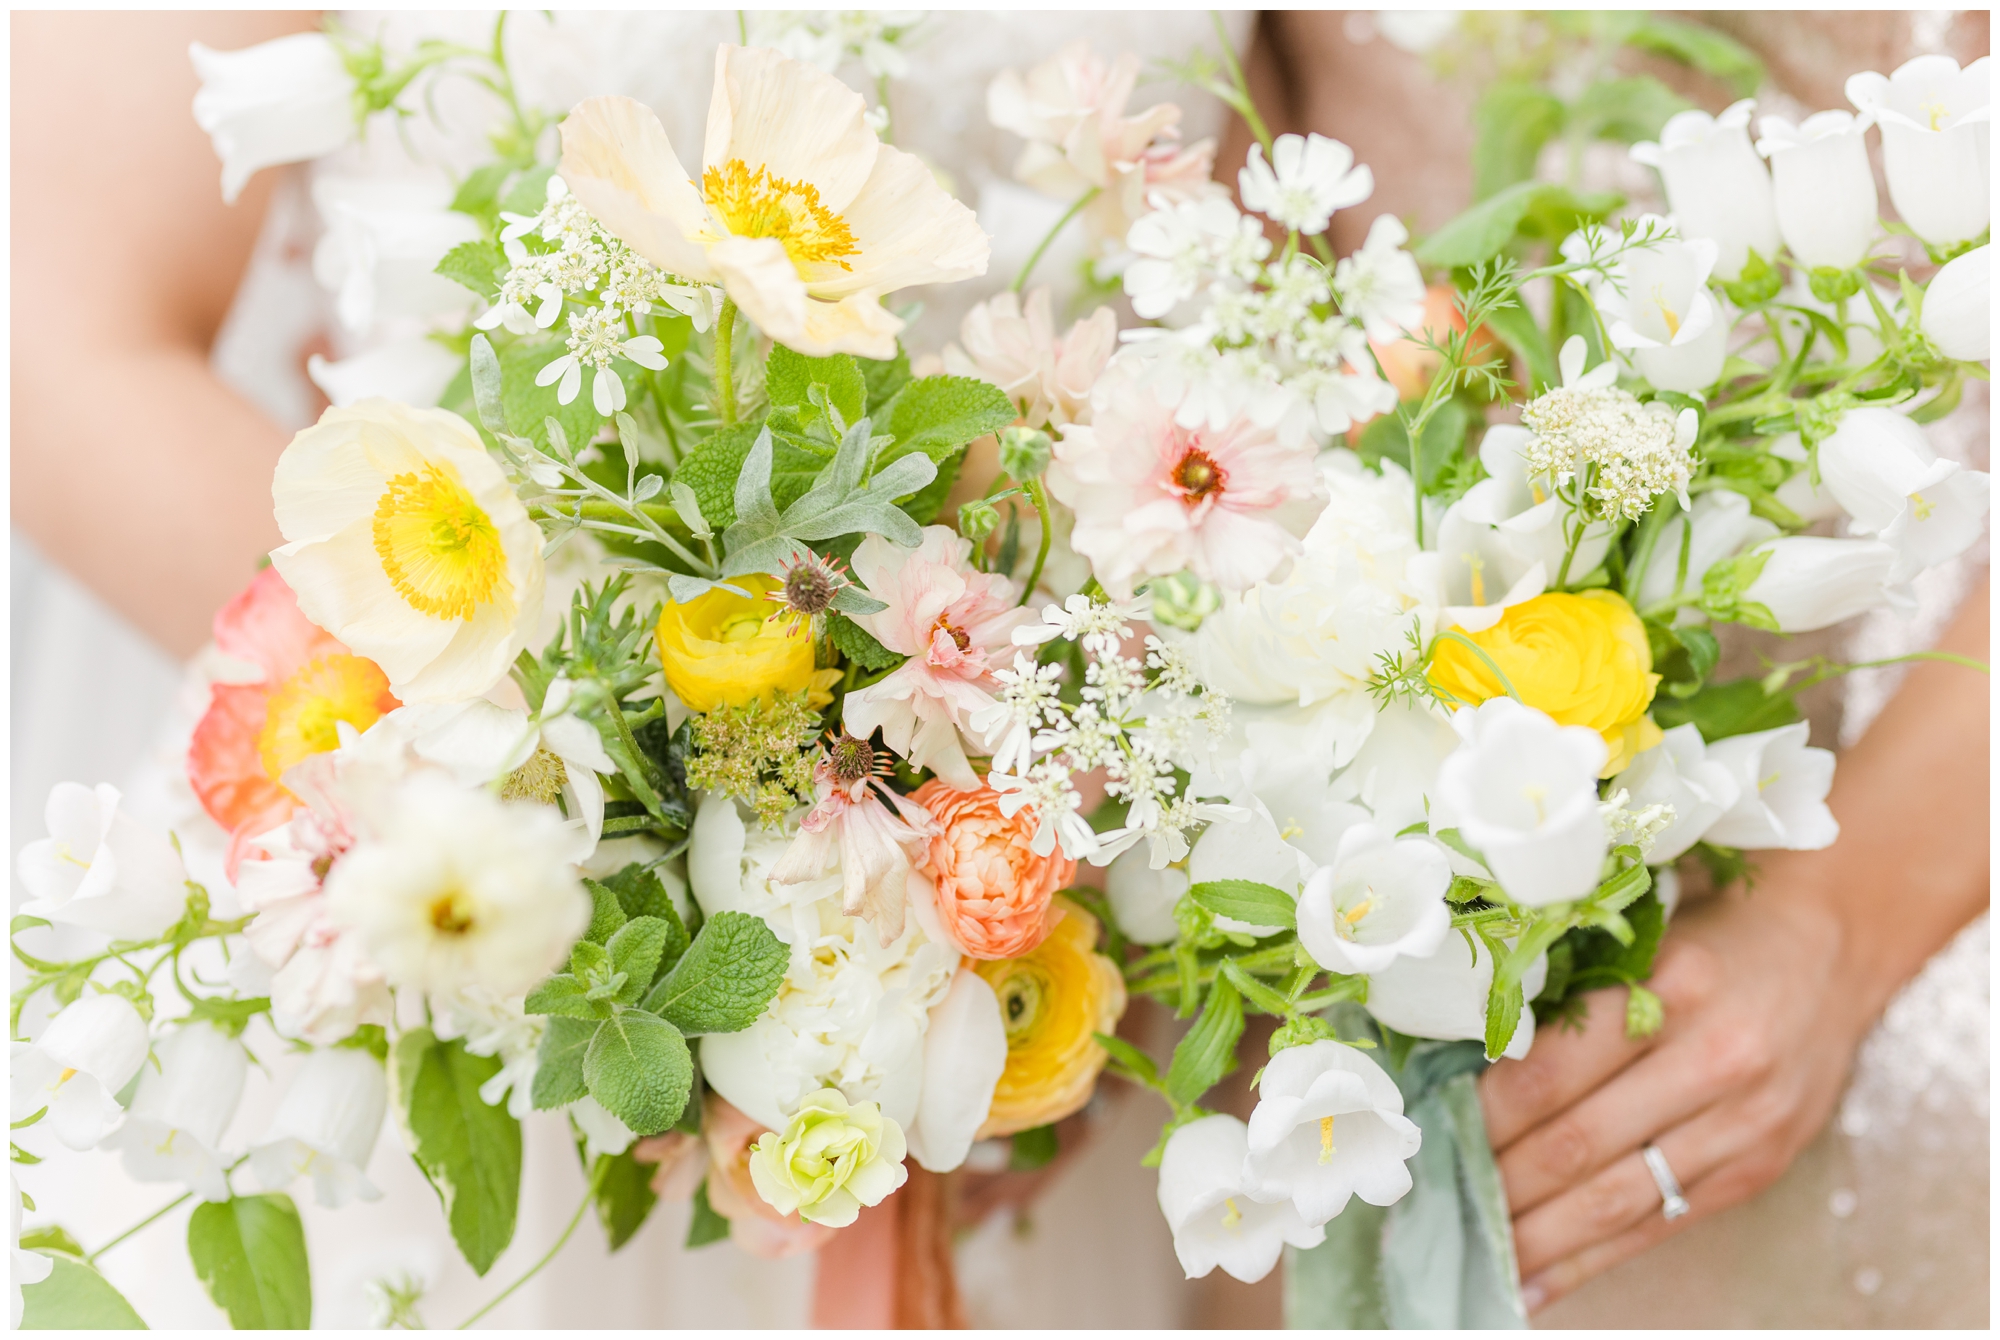 The wedding bouquet is held by the bride. It has pink, orange, yellow, and white flowers, also with greenery. 